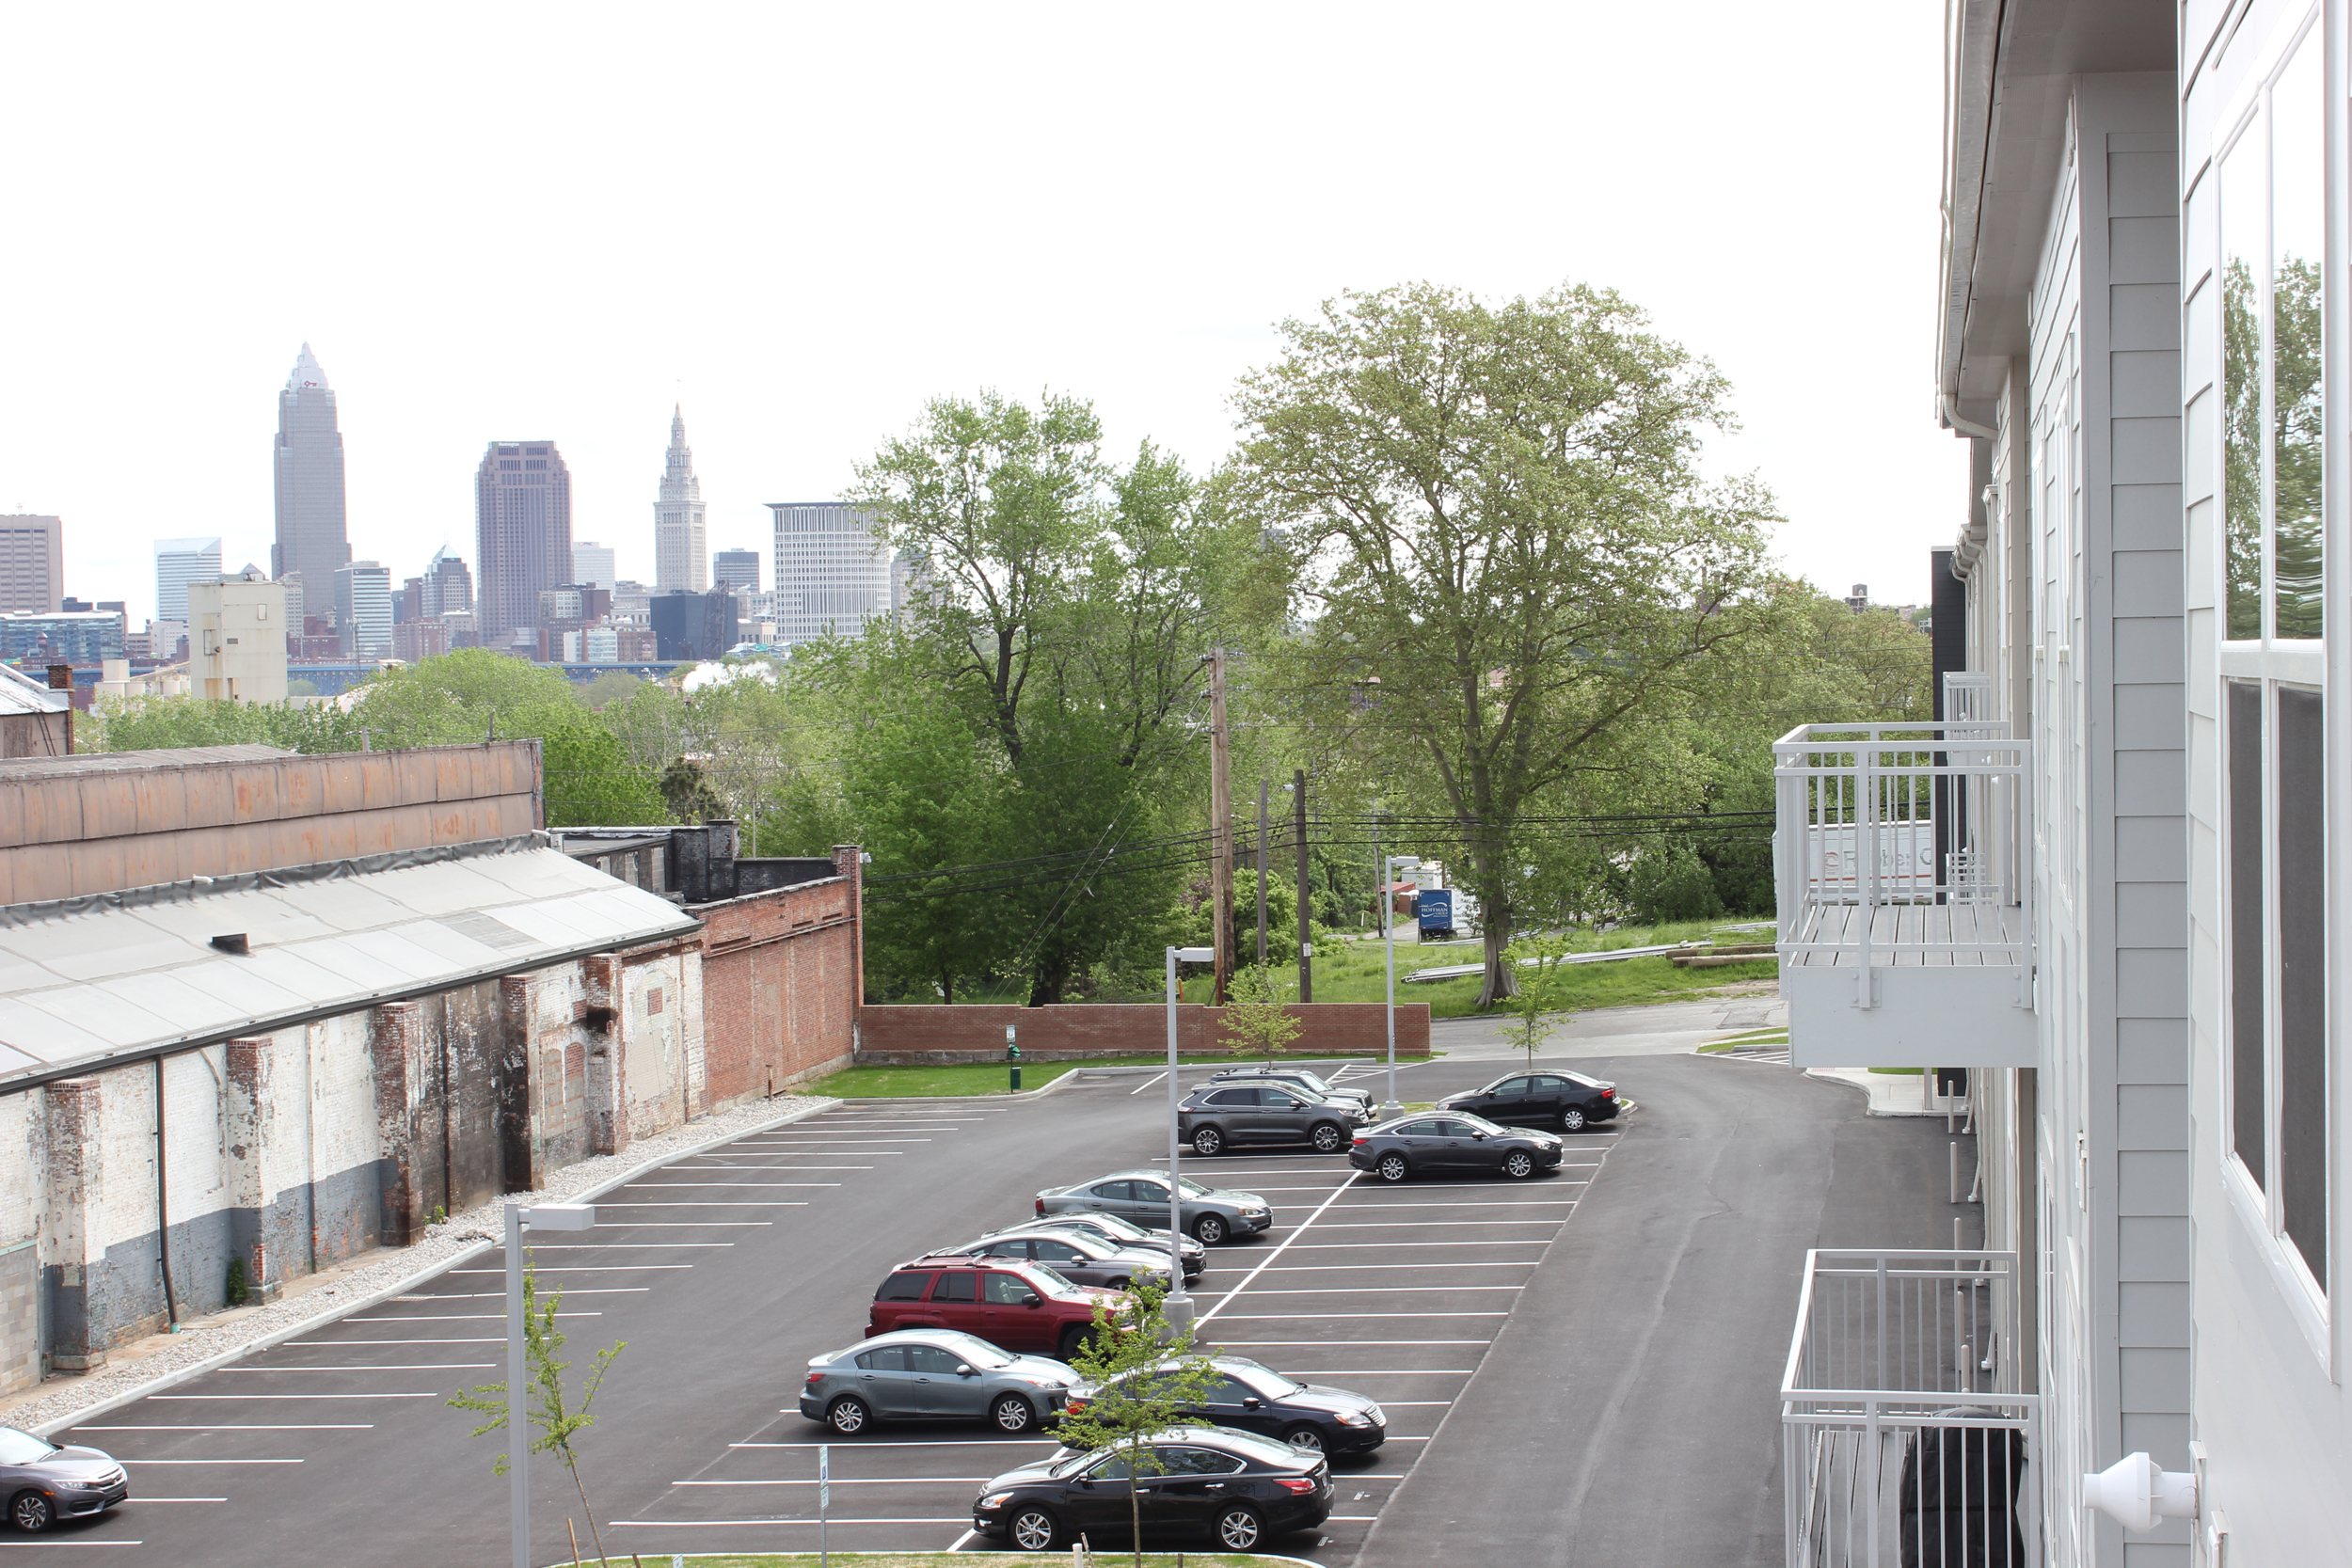 From the balcony of the two-bedroom model, downtown Cleveland’s skyline can be seen.